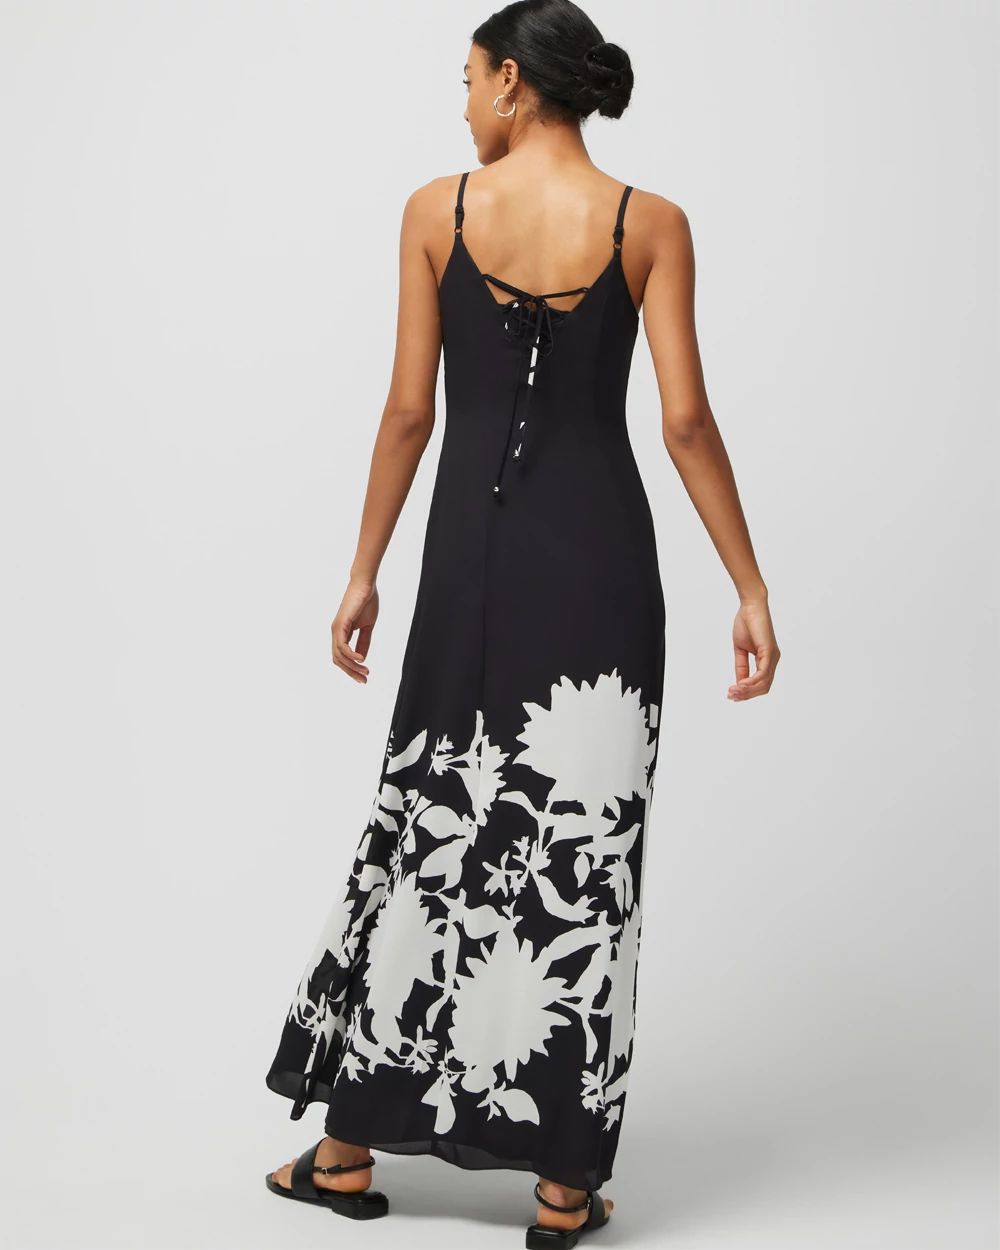 Lace-Up Back Maxi Dress click to view larger image.